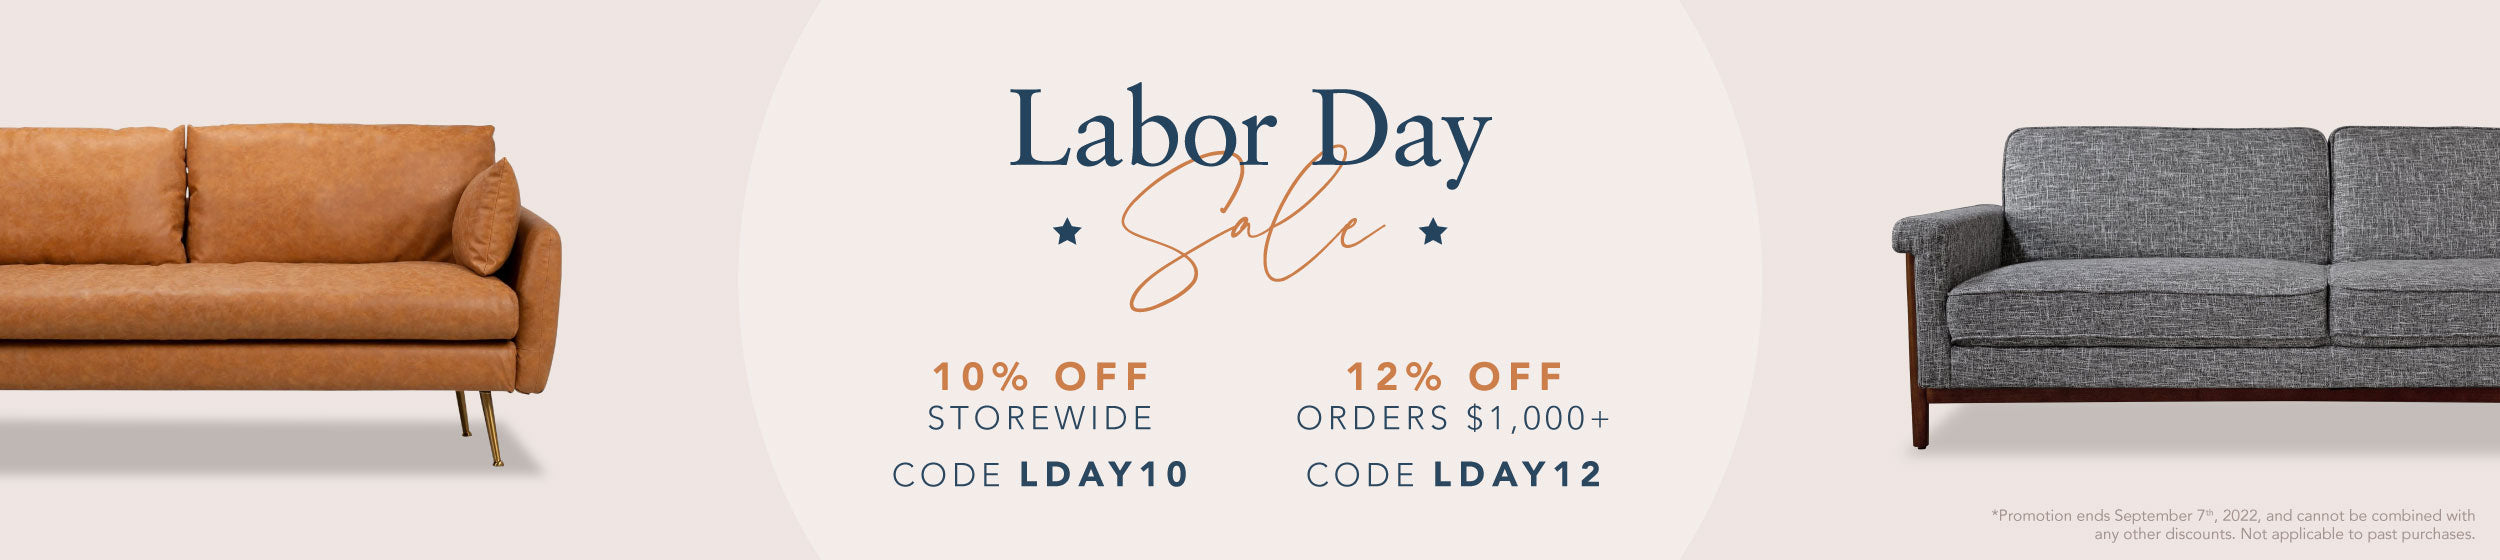 Labor Day Sale. 10% off sitewide with code LDAY10 and 12% off orders over $1000 with the code LDAY12. Promotion ends September 7th 2022, and cannot be combined with any other discounts. Not applicable to past purchases.